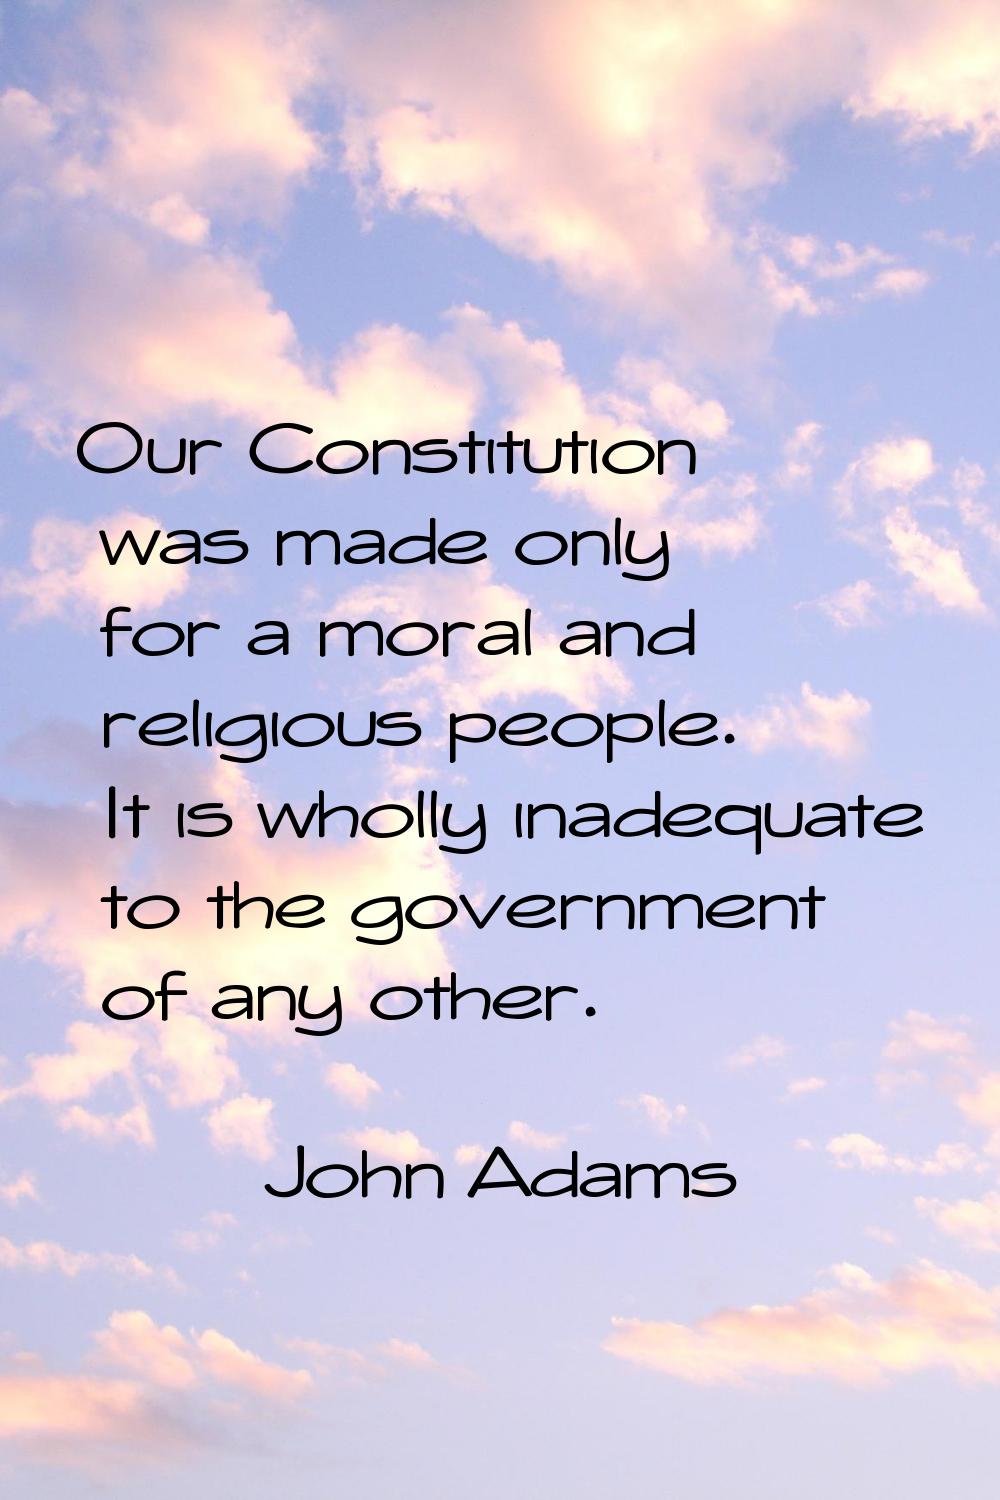 Our Constitution was made only for a moral and religious people. It is wholly inadequate to the gov